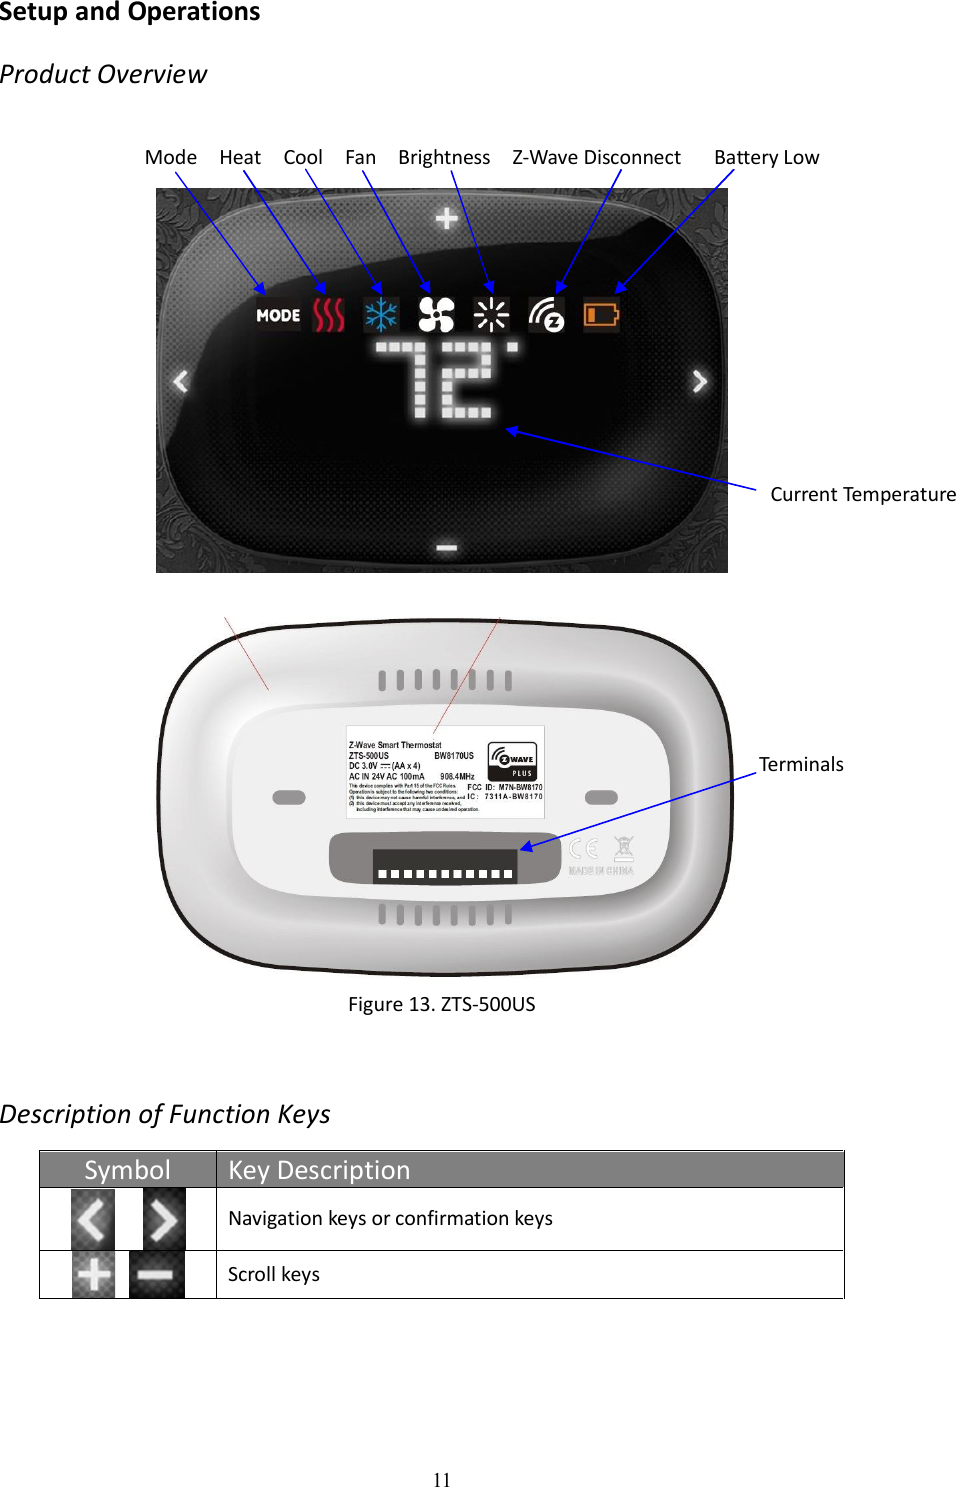 11  Setup and Operations  Product Overview       Figure 13. ZTS-500US   Description of Function Keys  Symbol  Key Description      Navigation keys or confirmation keys   Scroll keys   Mode    Heat    Cool    Fan    Brightness    Z-Wave Disconnect     Battery Low Current Temperature Terminals 